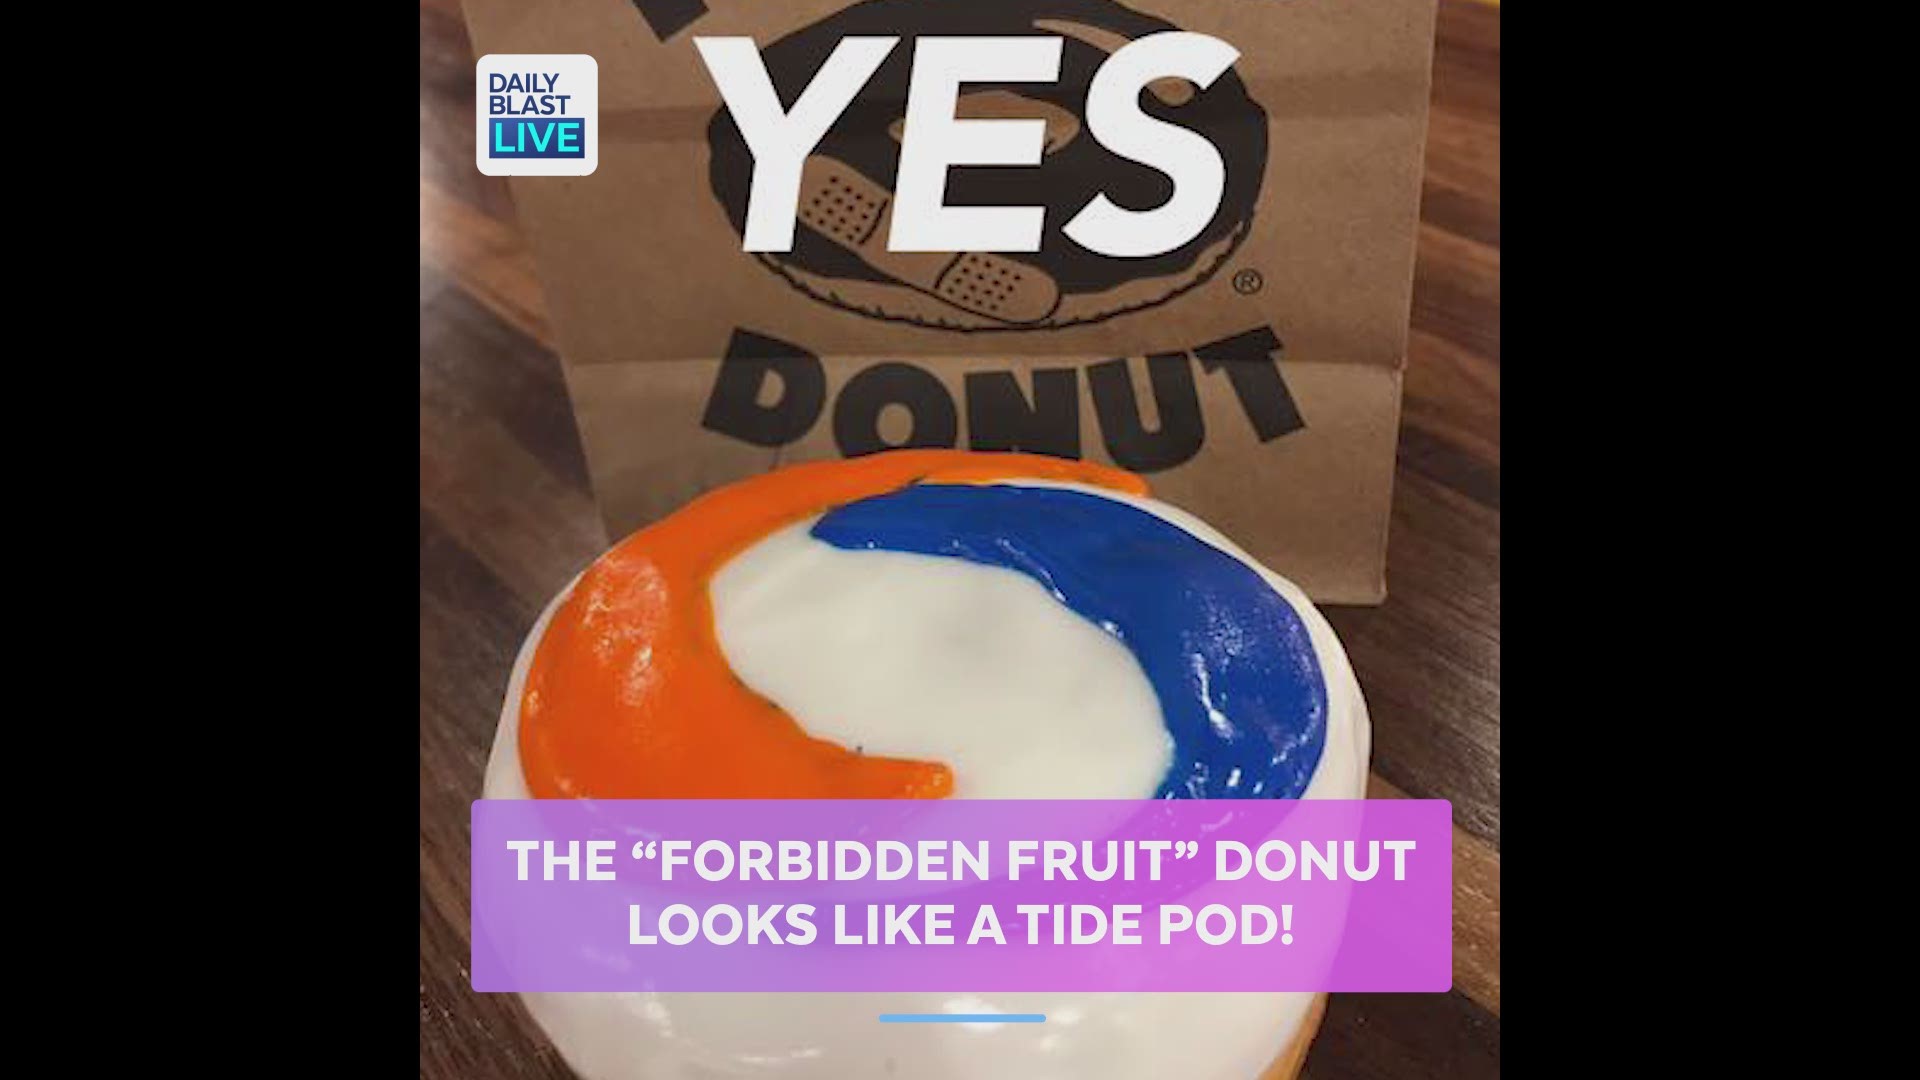 Hurts Donut CO. in Springfield, MO has a delicious alternative to the dangerous Tide Pod Challenge! What do you think? Let Daily Blast LIVE know!